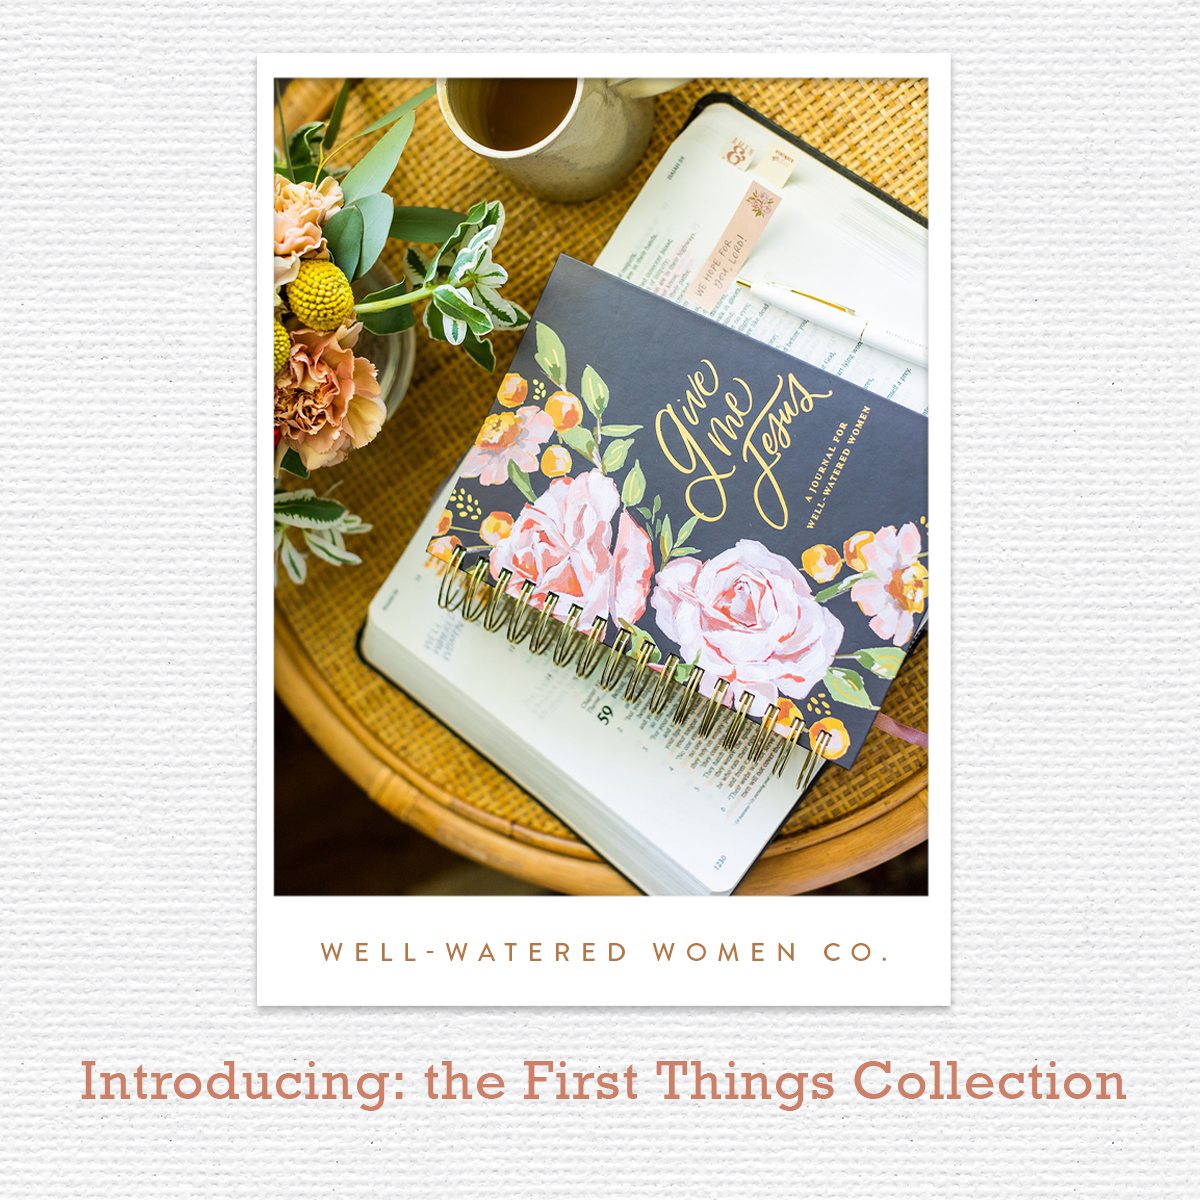 Introducing the First Things Collection - an Article from Well-Watered Women